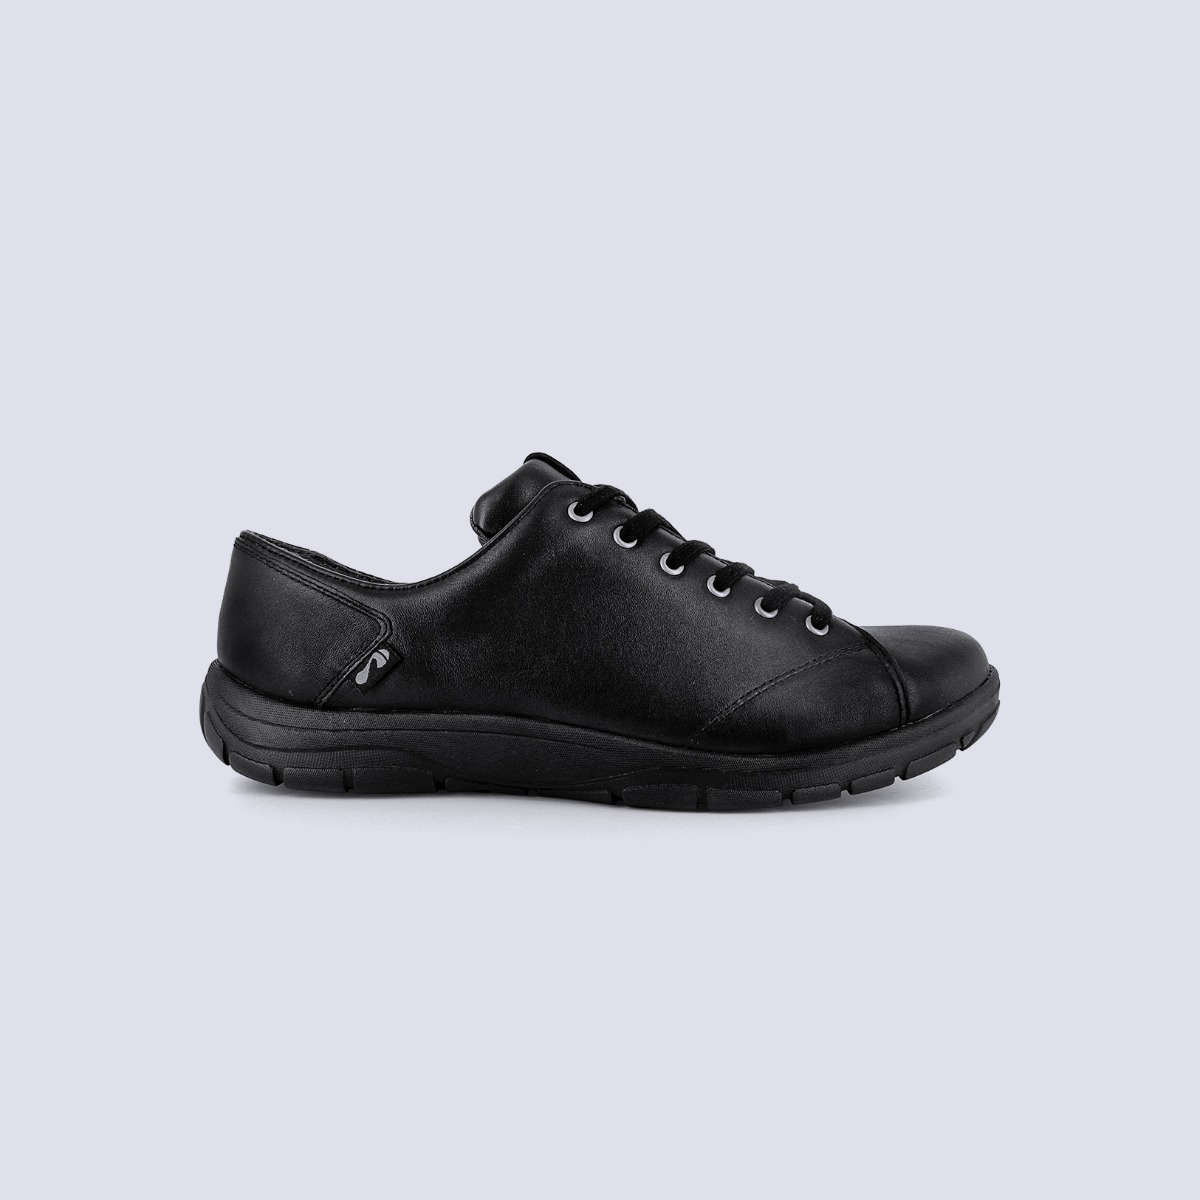 Strive Weston Black orthotic shoes for women